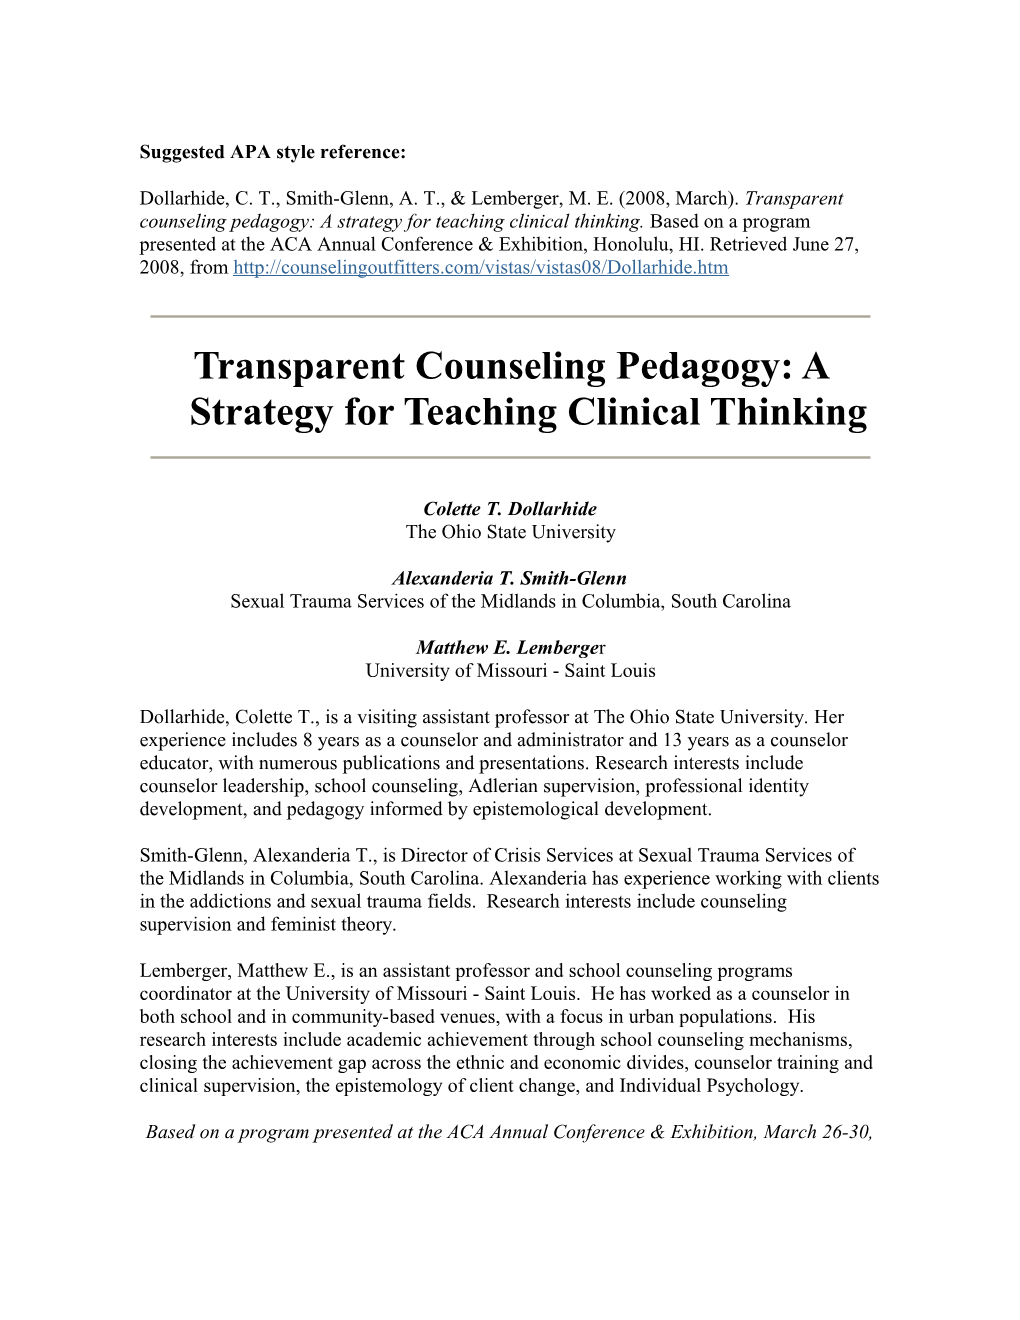 Transparent Counseling Pedagogy: a Strategy for Teaching Clinical Thinking